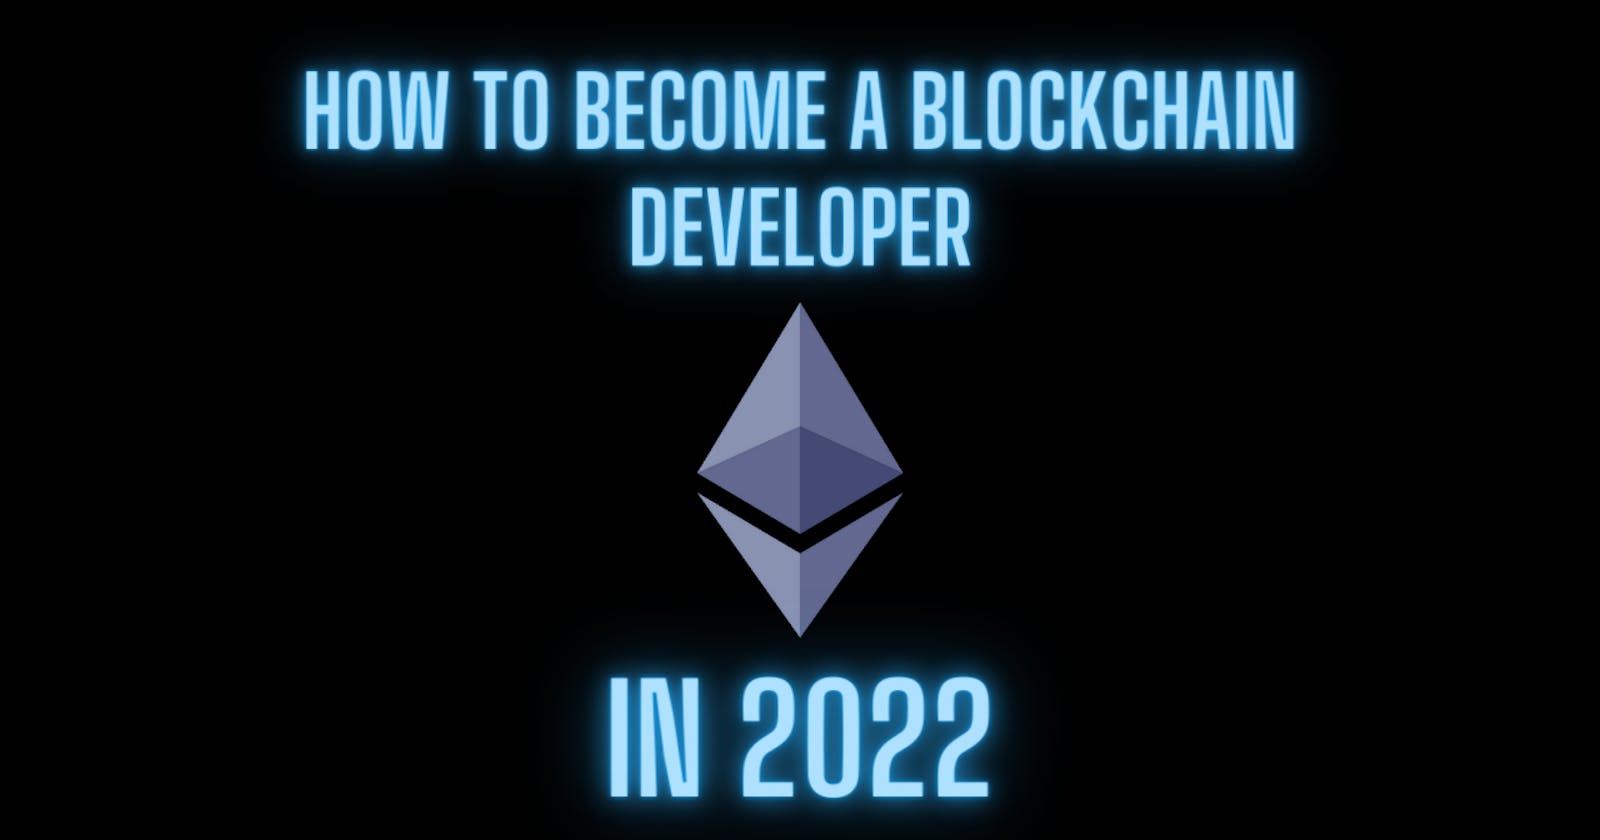 Roadmap to become a blockchain dev in 2022